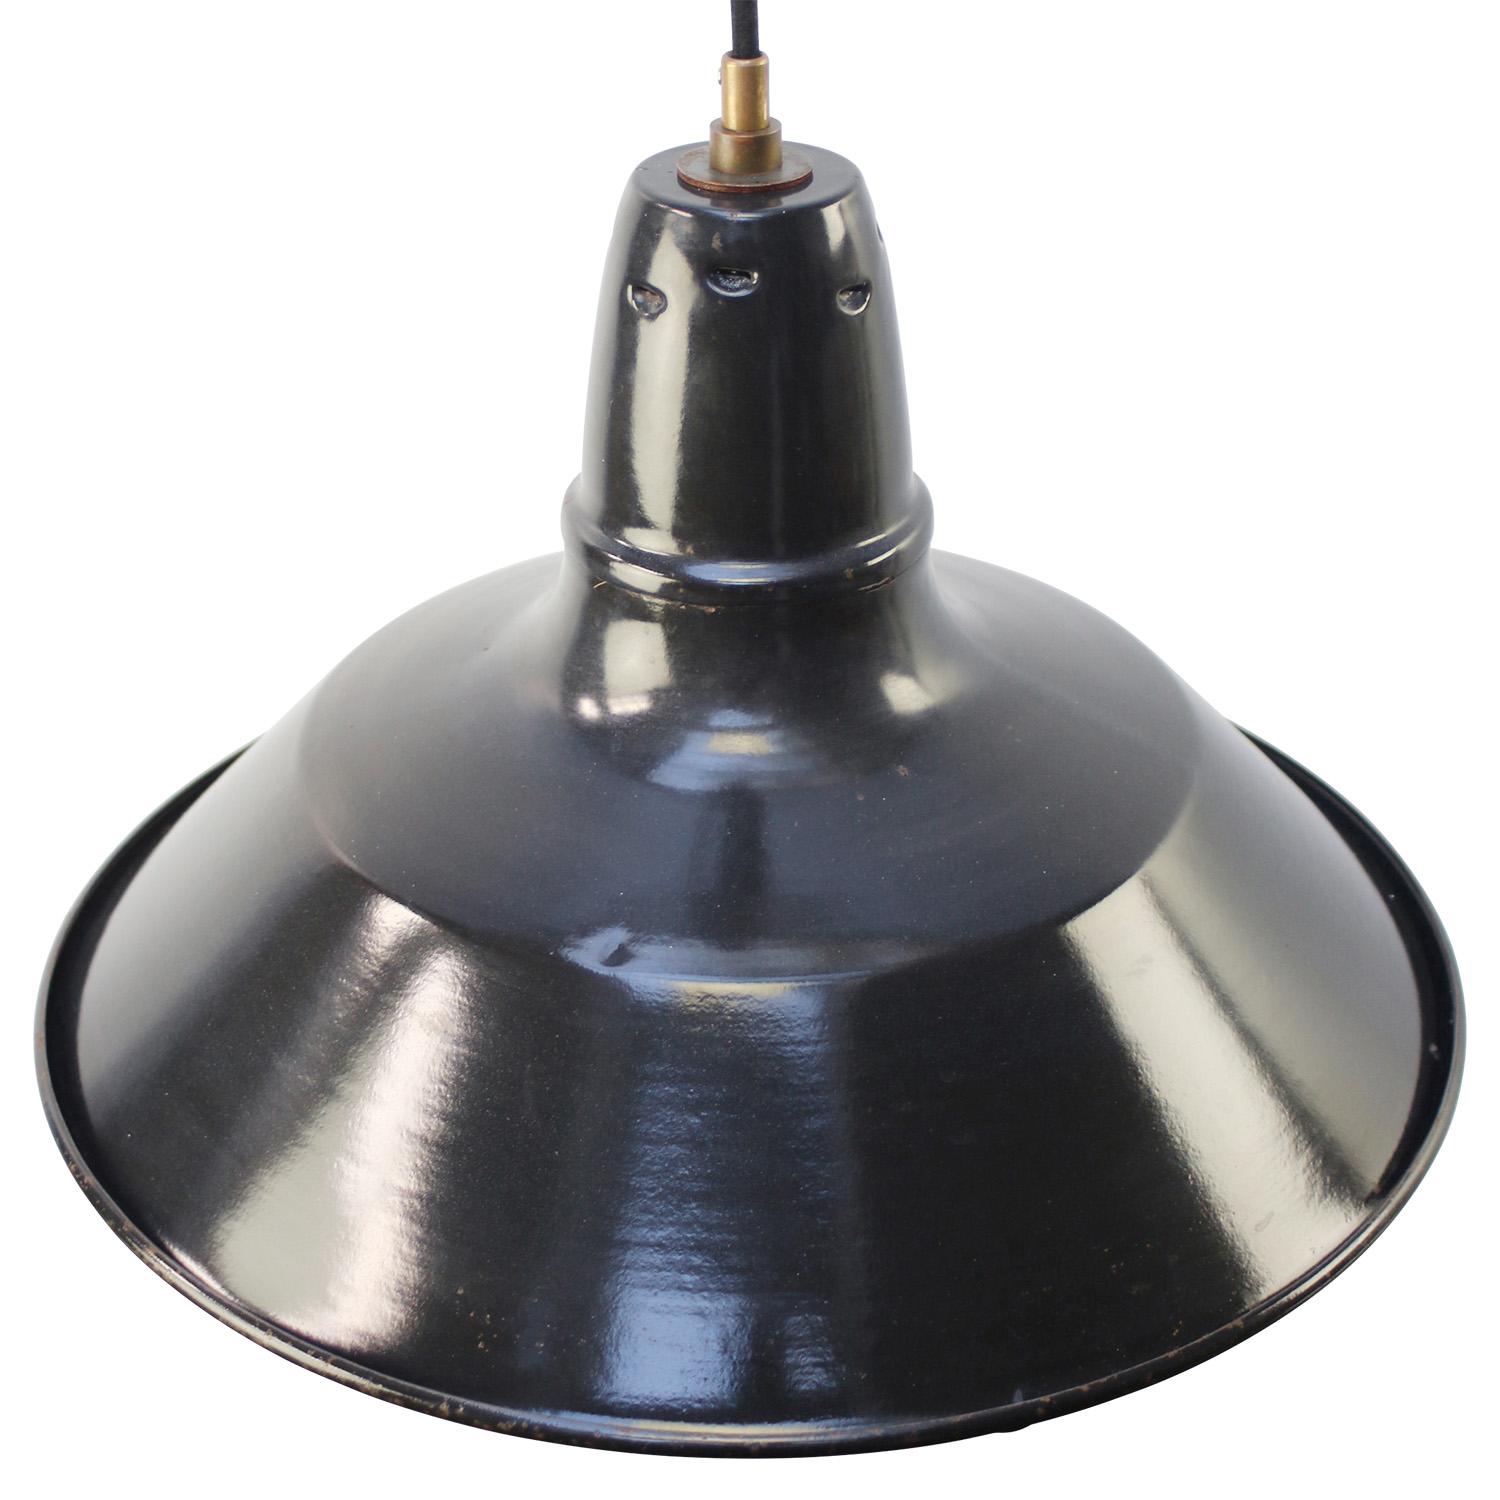 French black / blue Industrial pendant lamp.
Used in warehouses and factories in France and Belgium. 

Weight: 1.40 kg / 3.1 lb

Priced per individual item. All lamps have been made suitable by international standards for incandescent light bulbs,